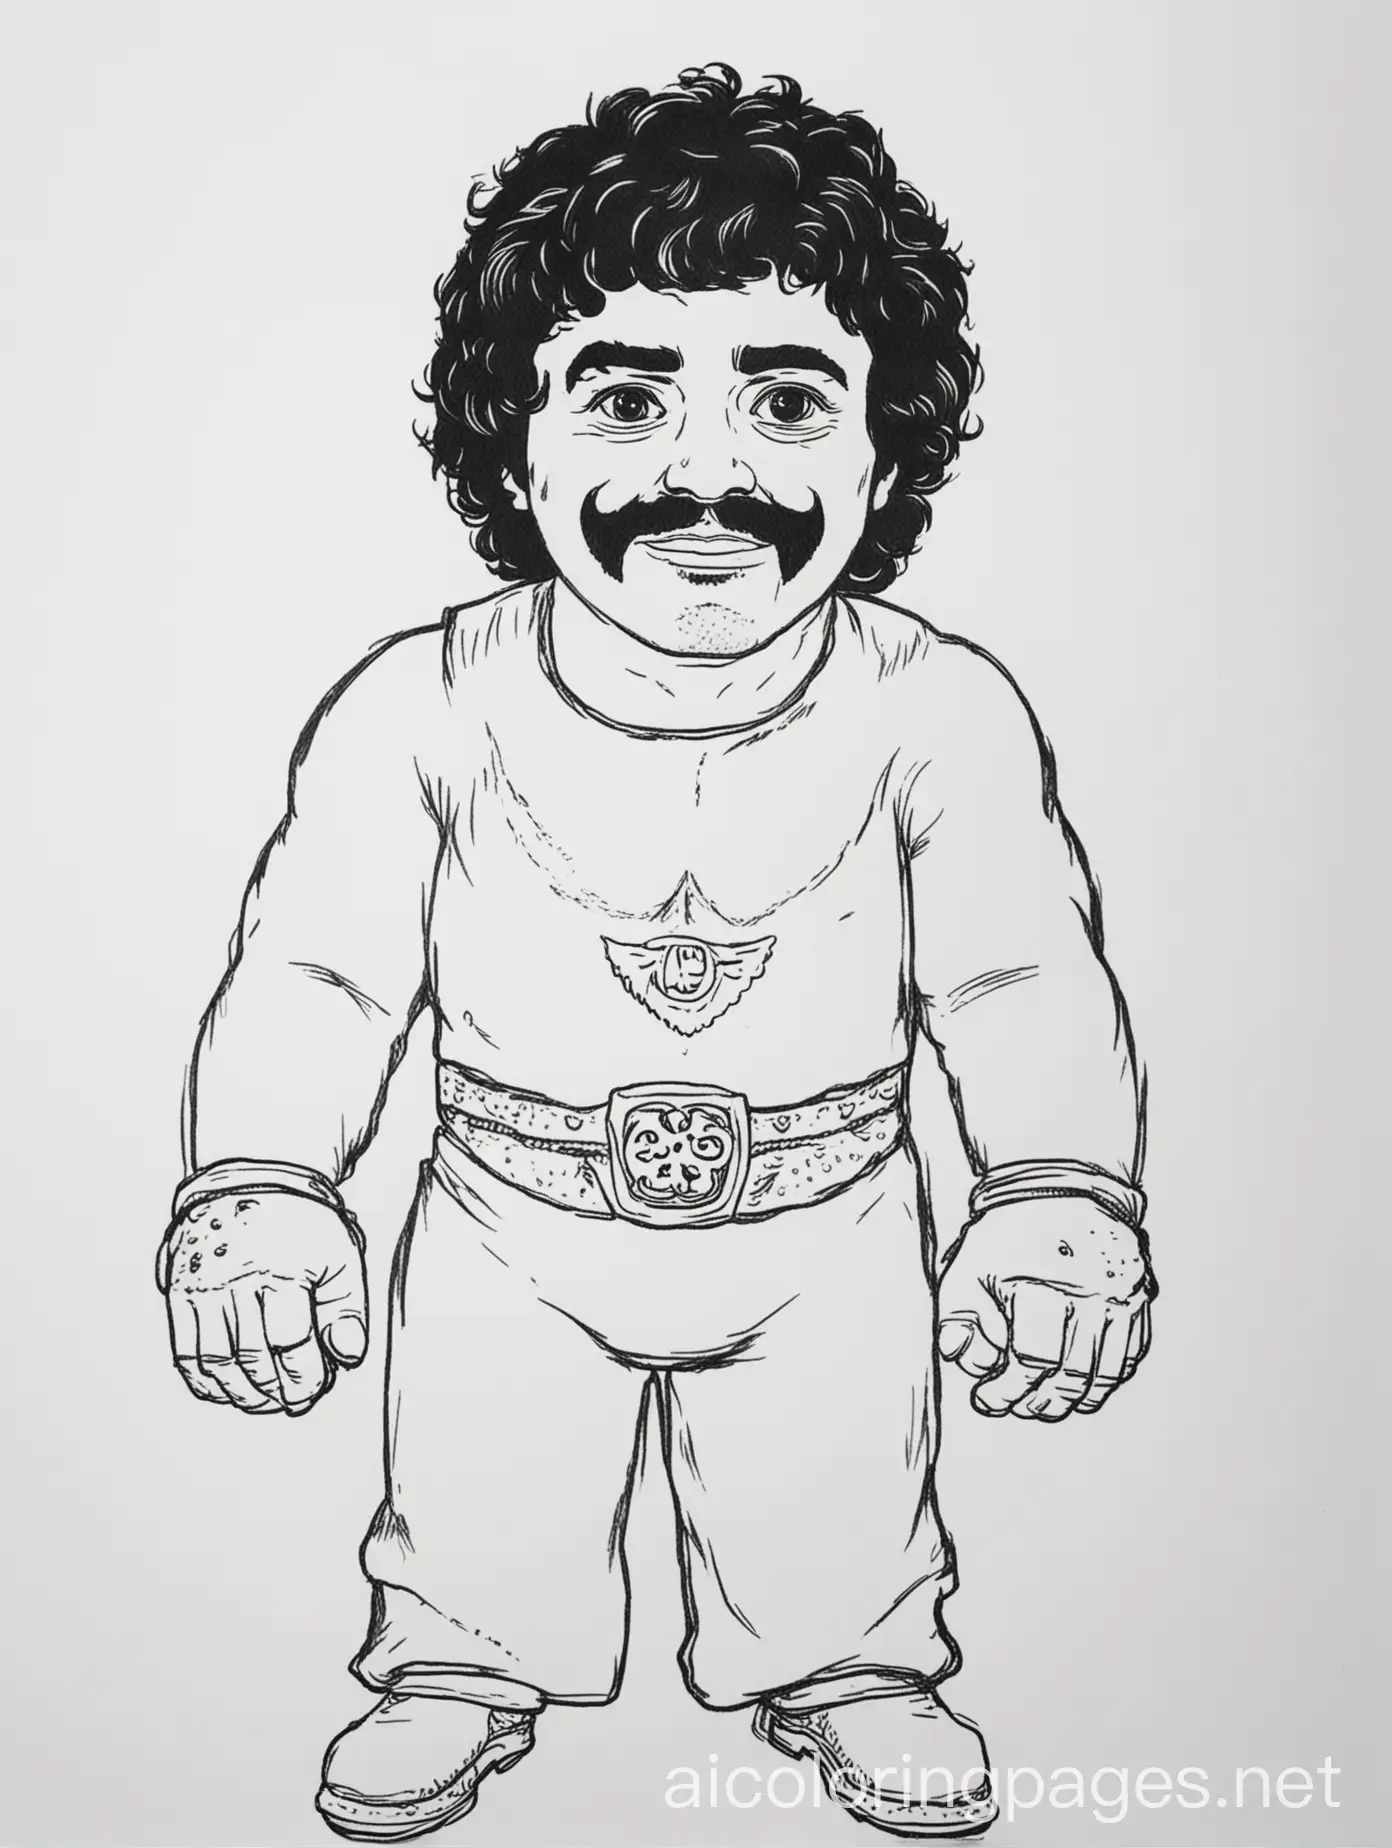 NACHO LIBRE
, Coloring Page, black and white, line art, white background, Simplicity, Ample White Space. The background of the coloring page is plain white to make it easy for young children to color within the lines. The outlines of all the subjects are easy to distinguish, making it simple for kids to color without too much difficulty